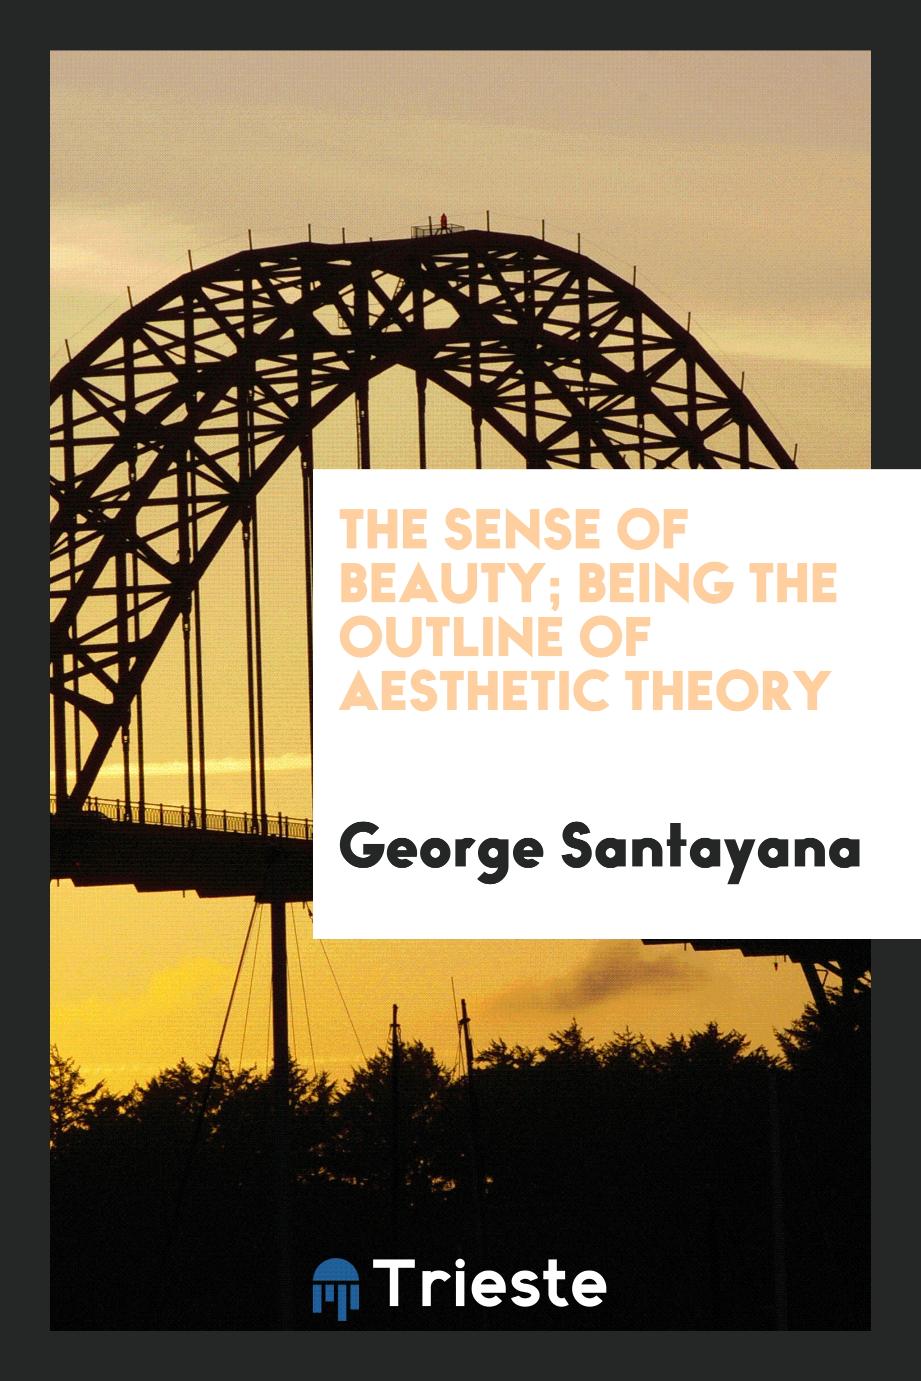 The sense of beauty; being the outline of aesthetic theory